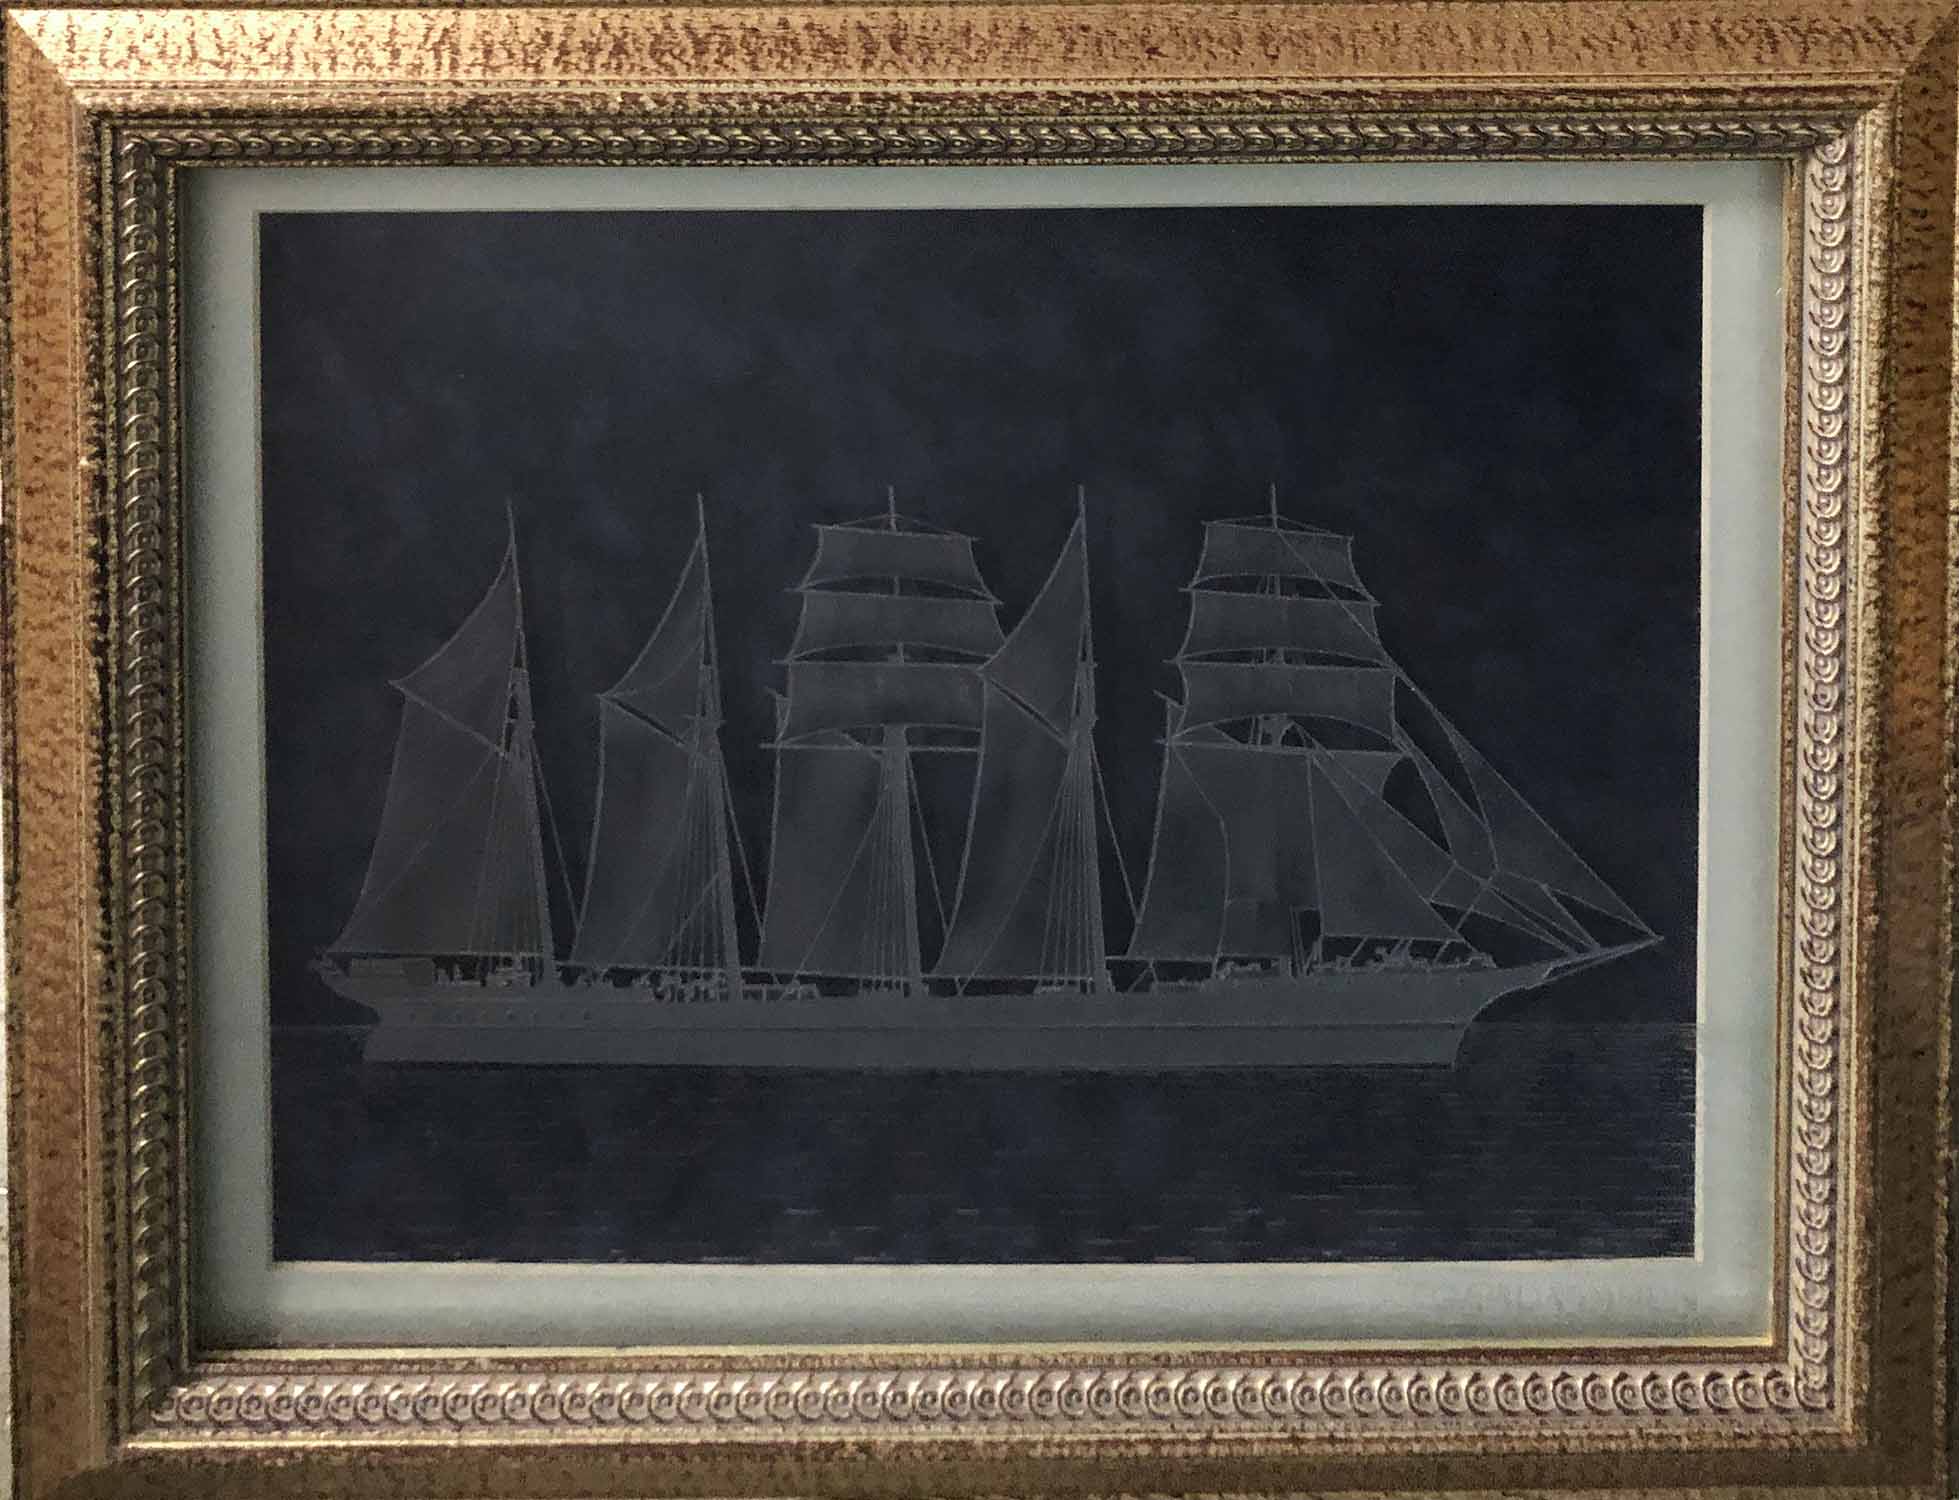 MARITIME SCHOOL 'Neotsfield' and 'Carl Vinnen', ship portraits on etched glass, 30cm x 37cm, framed. - Image 2 of 3